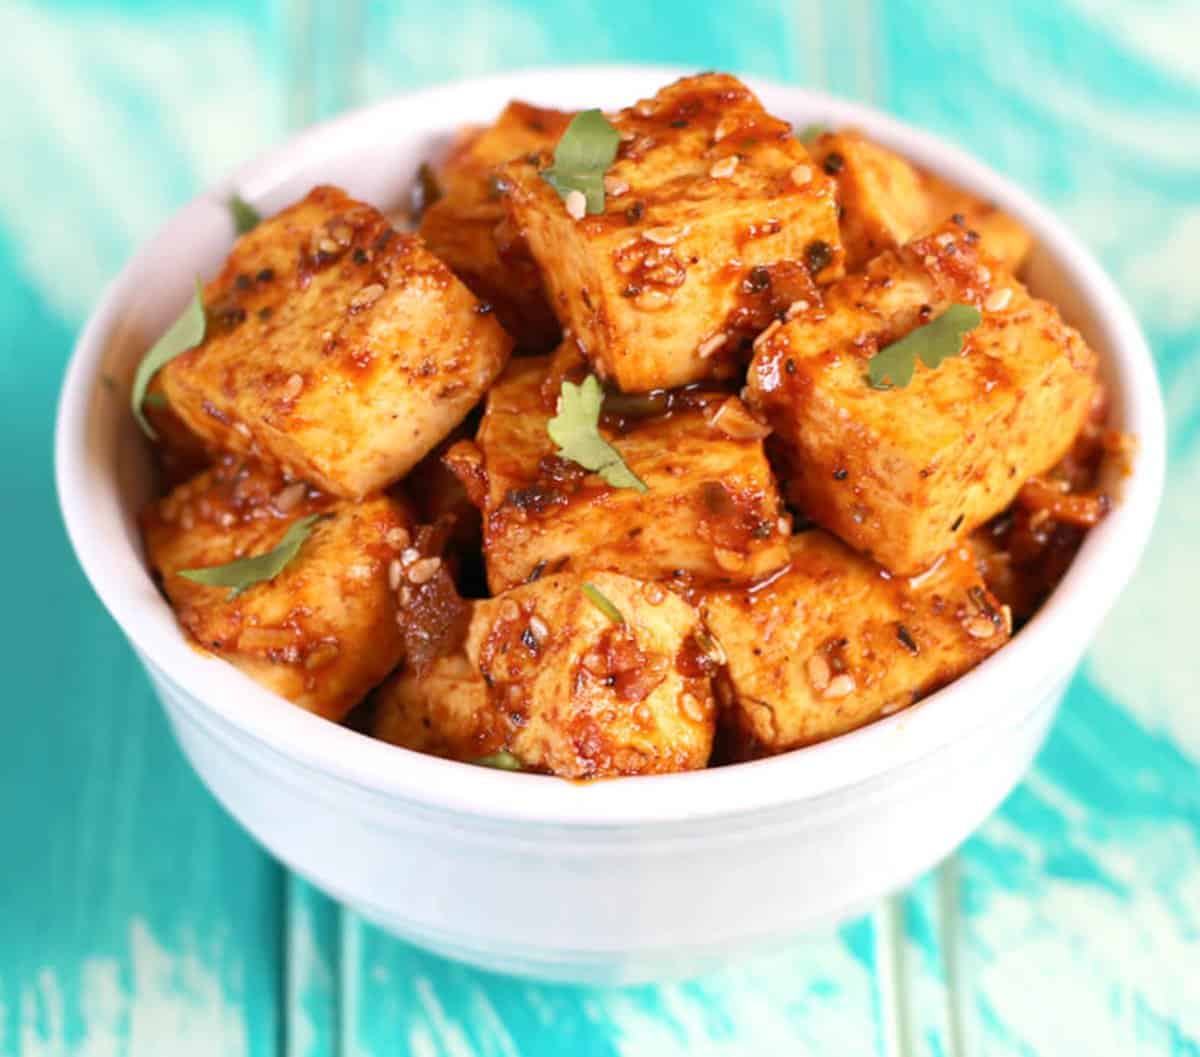 Simple and delicious Tofu dish tossed in honey and Sriracha sauce in a bowl.